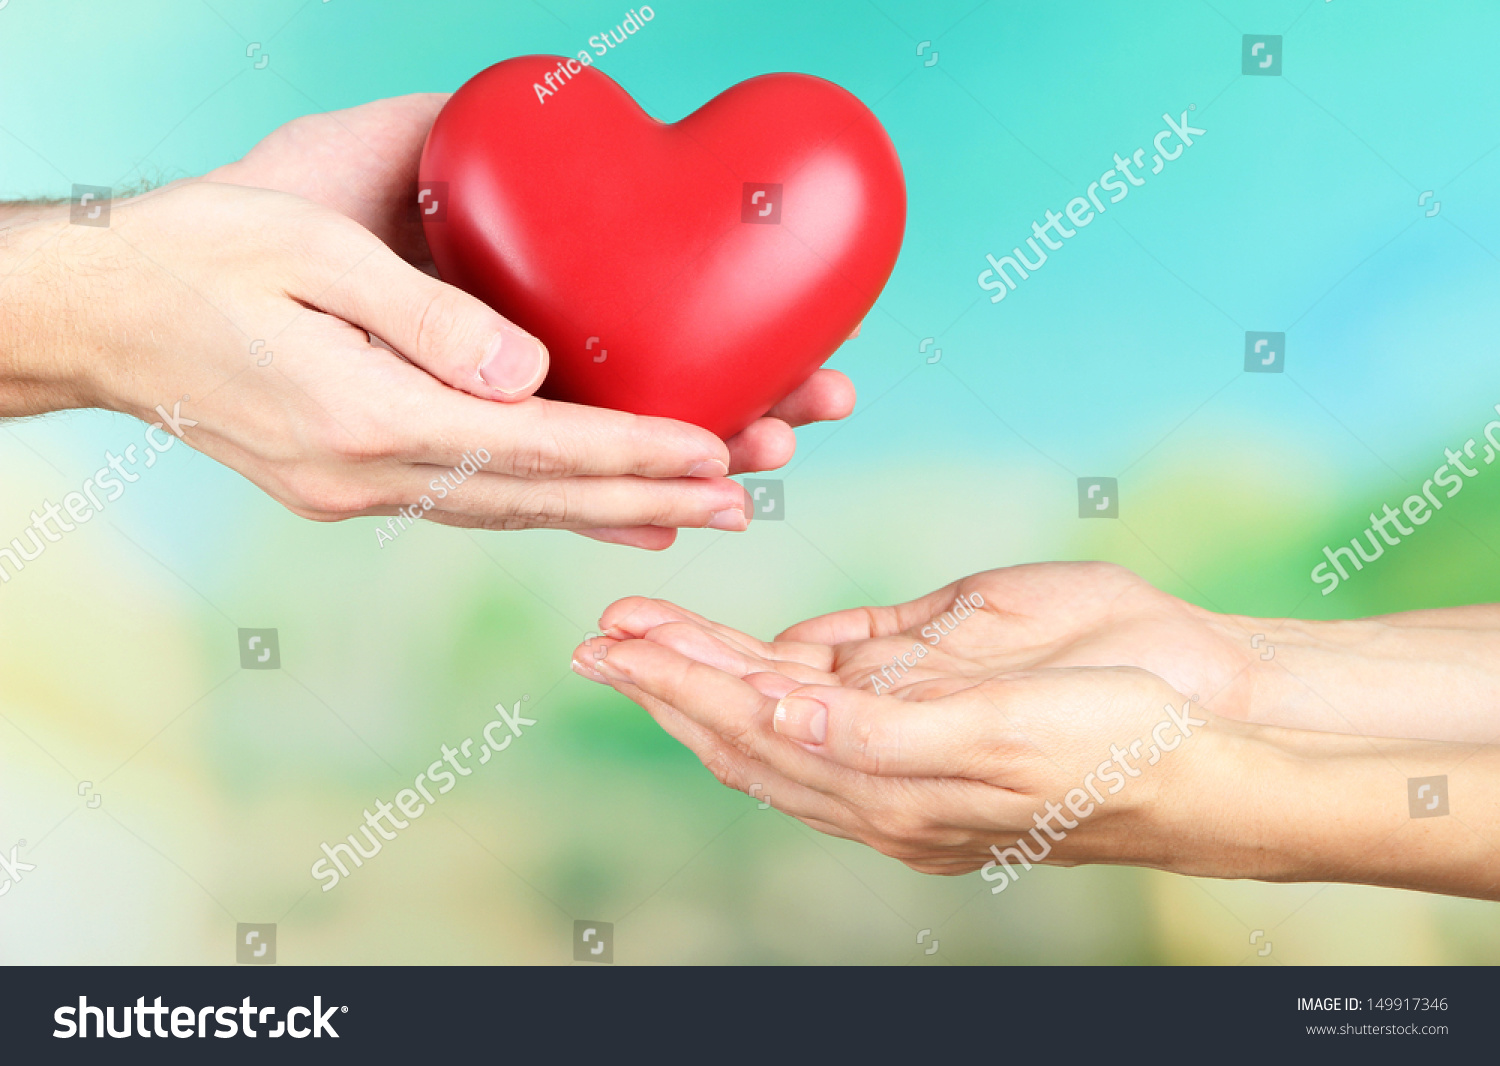 Heart in hands on nature background #149917346